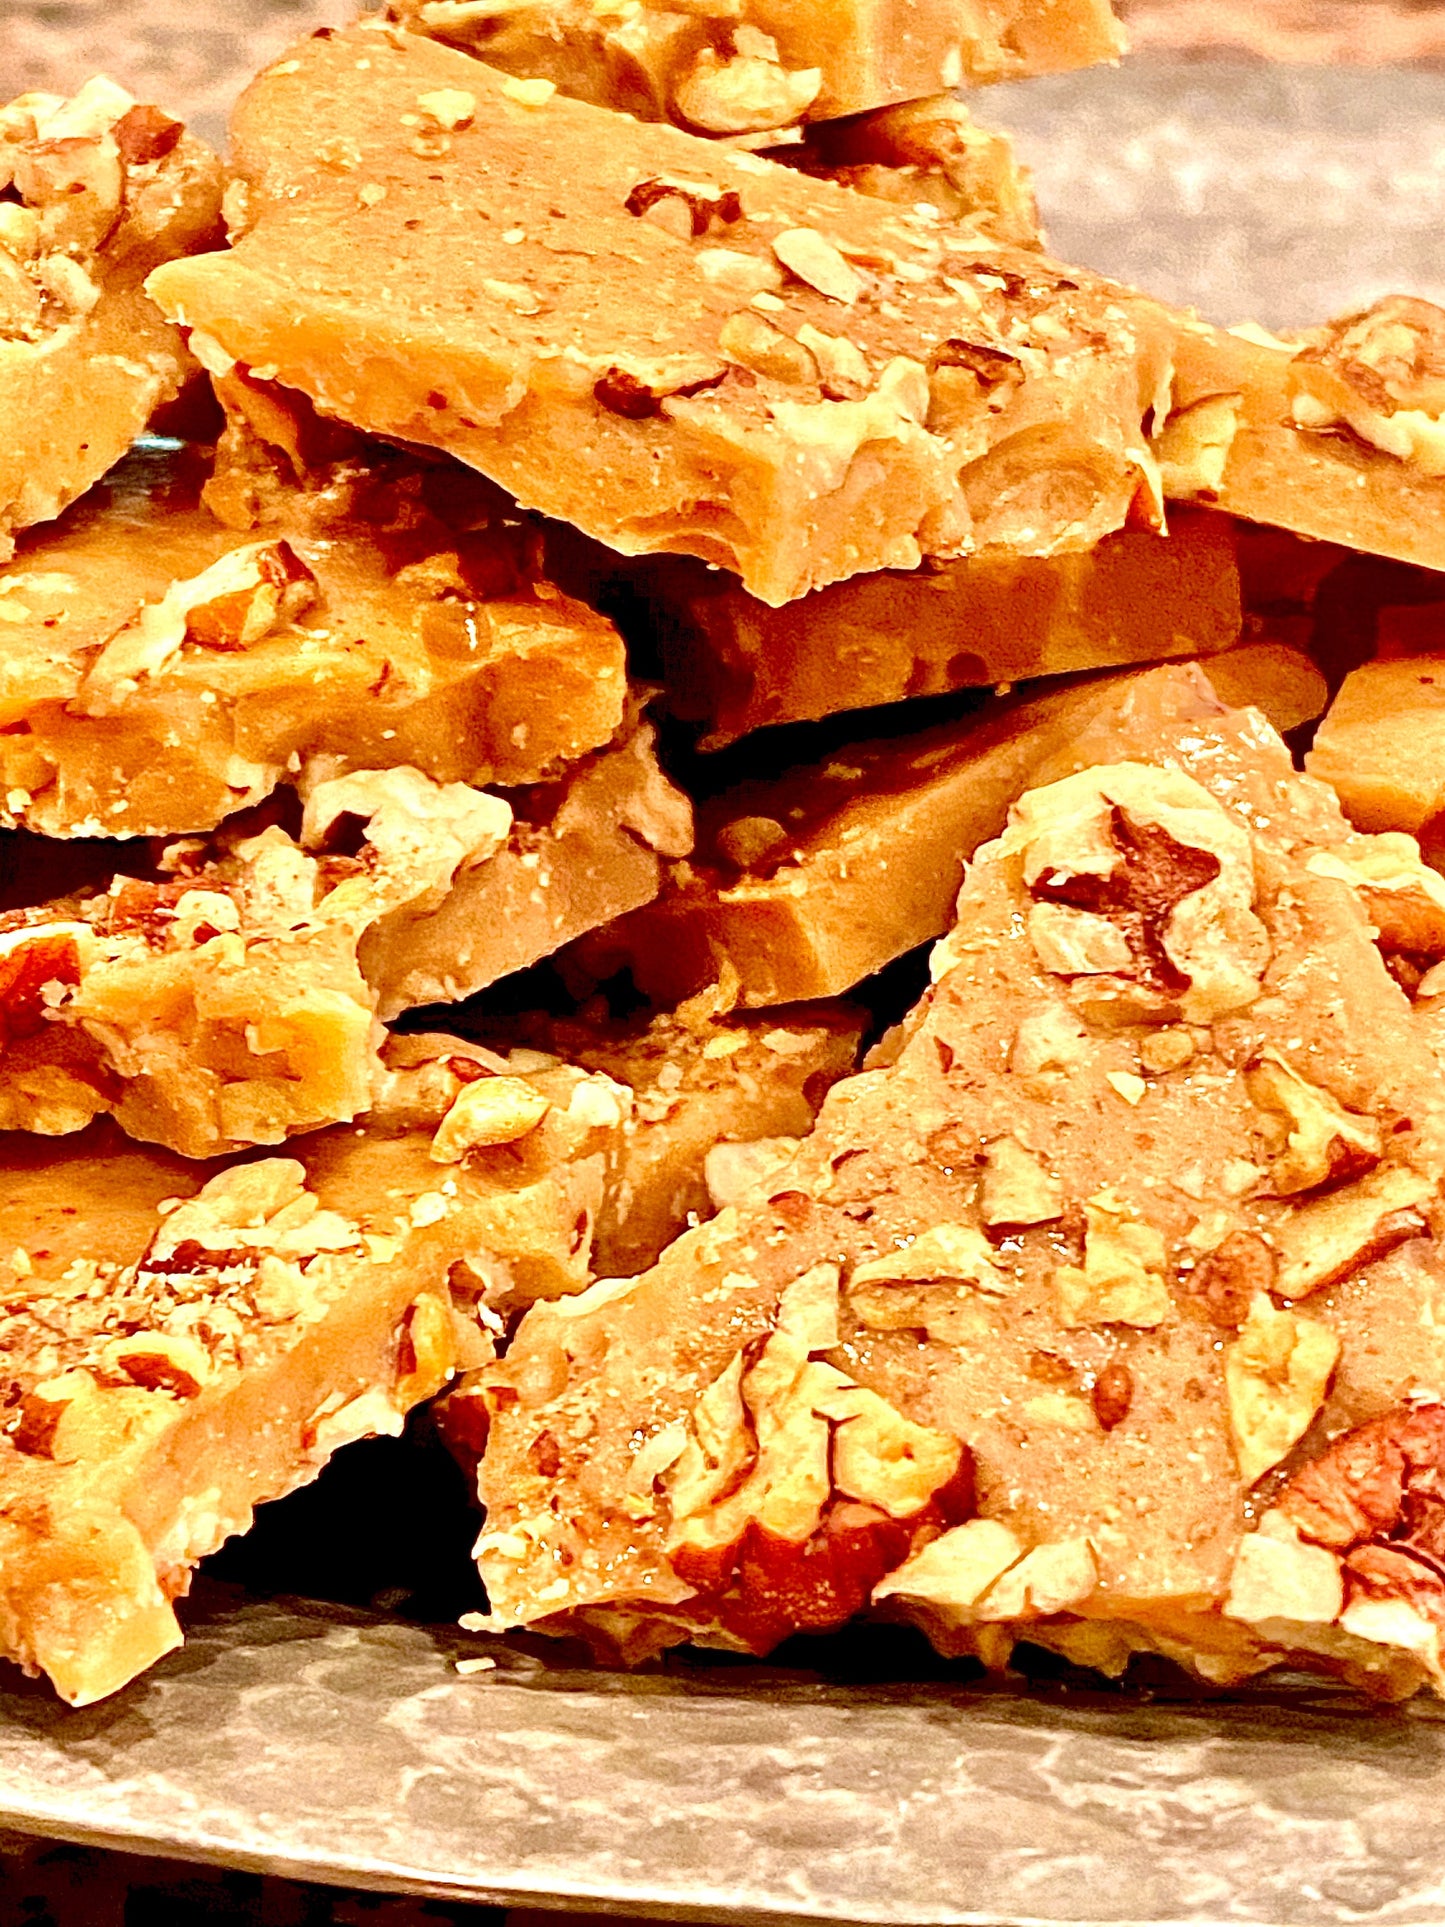 Toffee with fresh roasted pecans